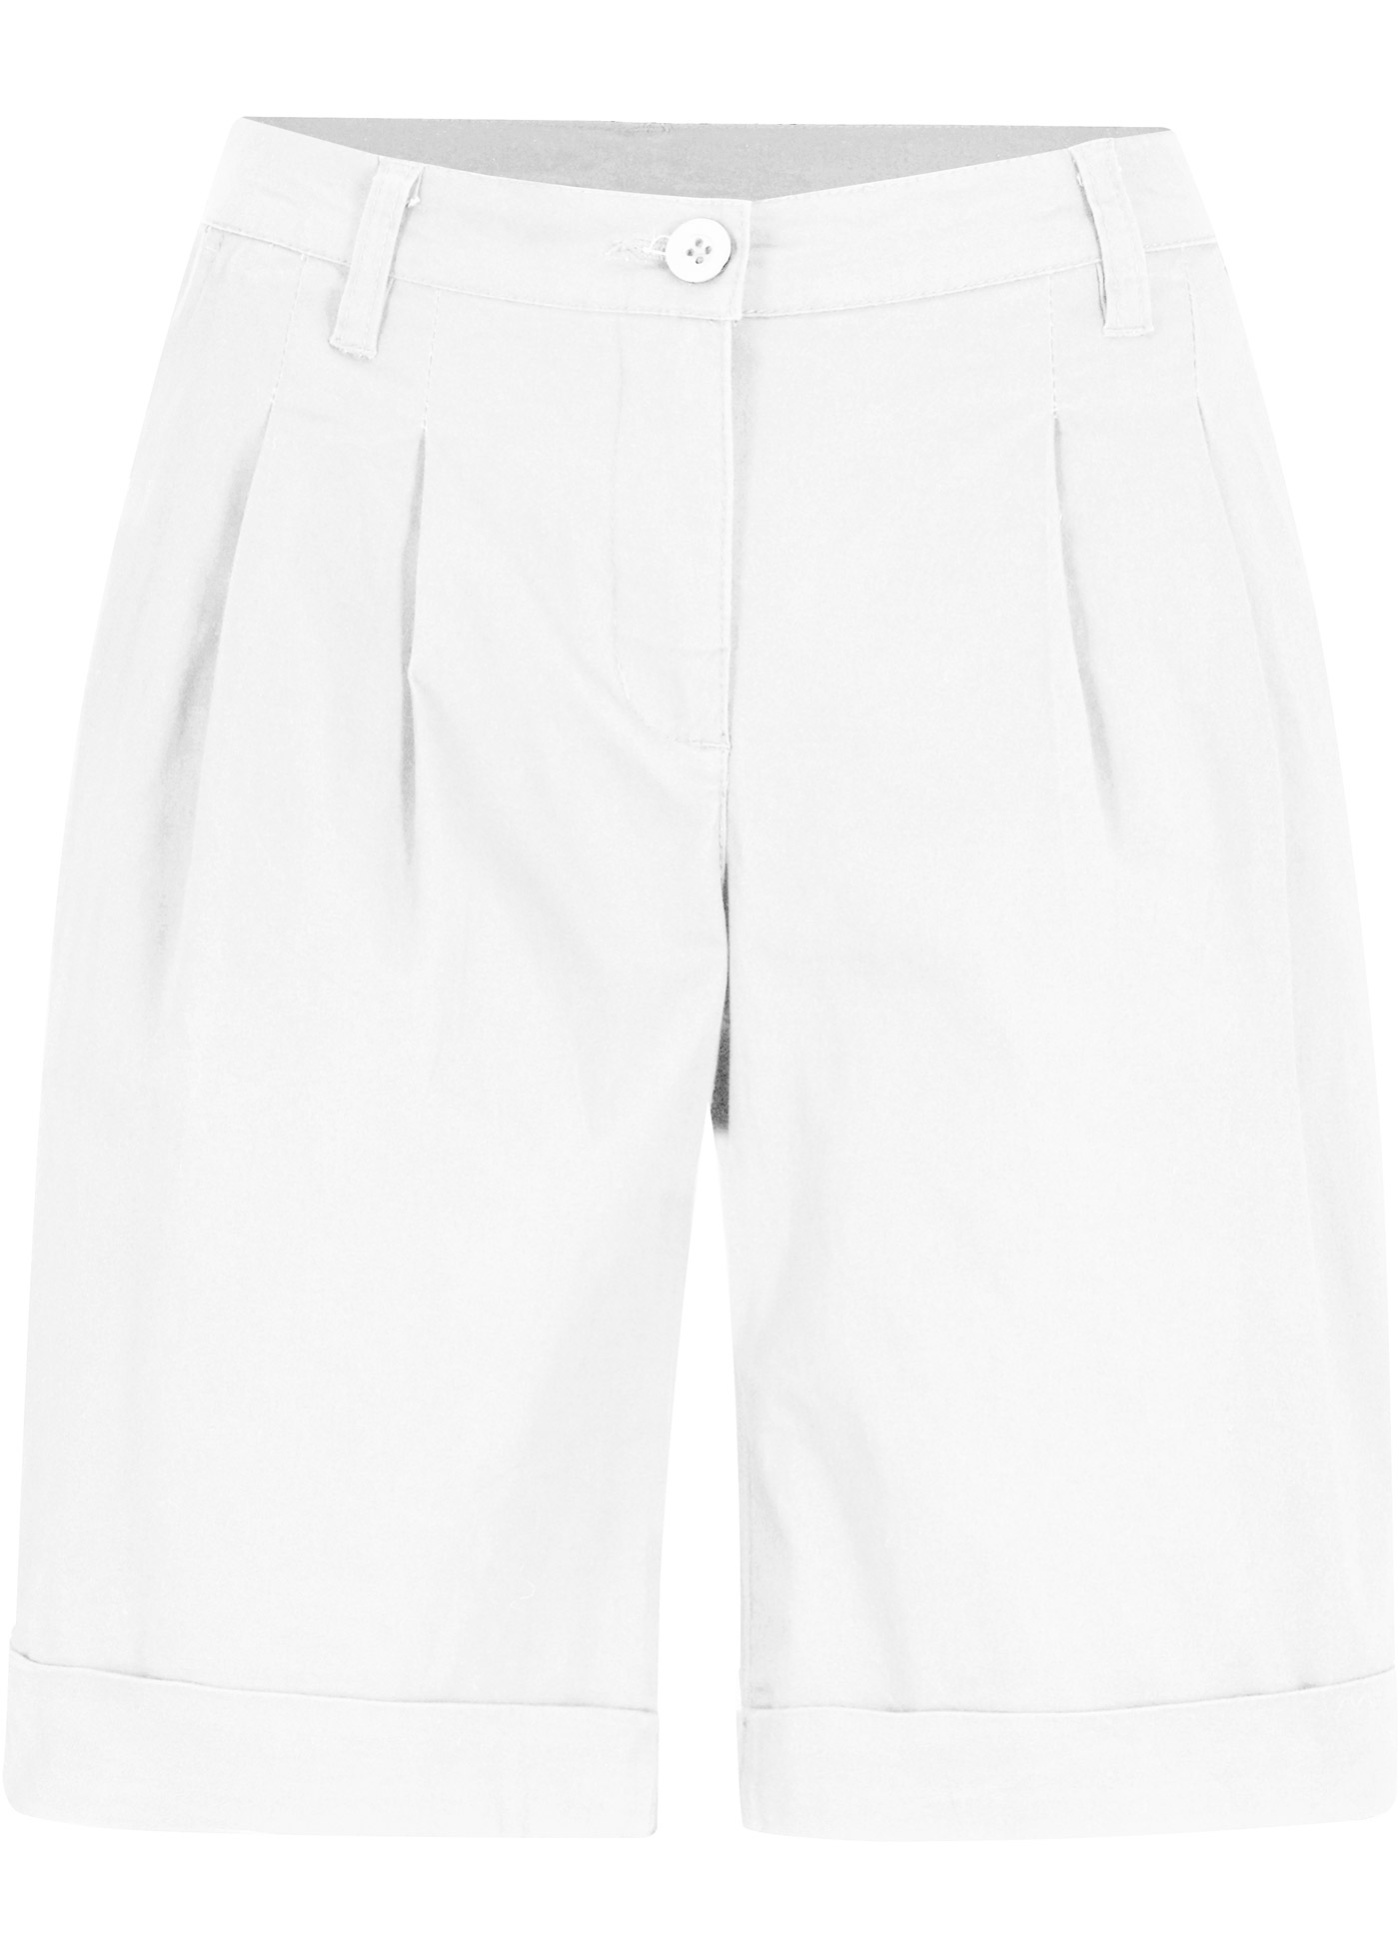 Shorts in cotone loose fit (Bianco) - bpc bonprix collection